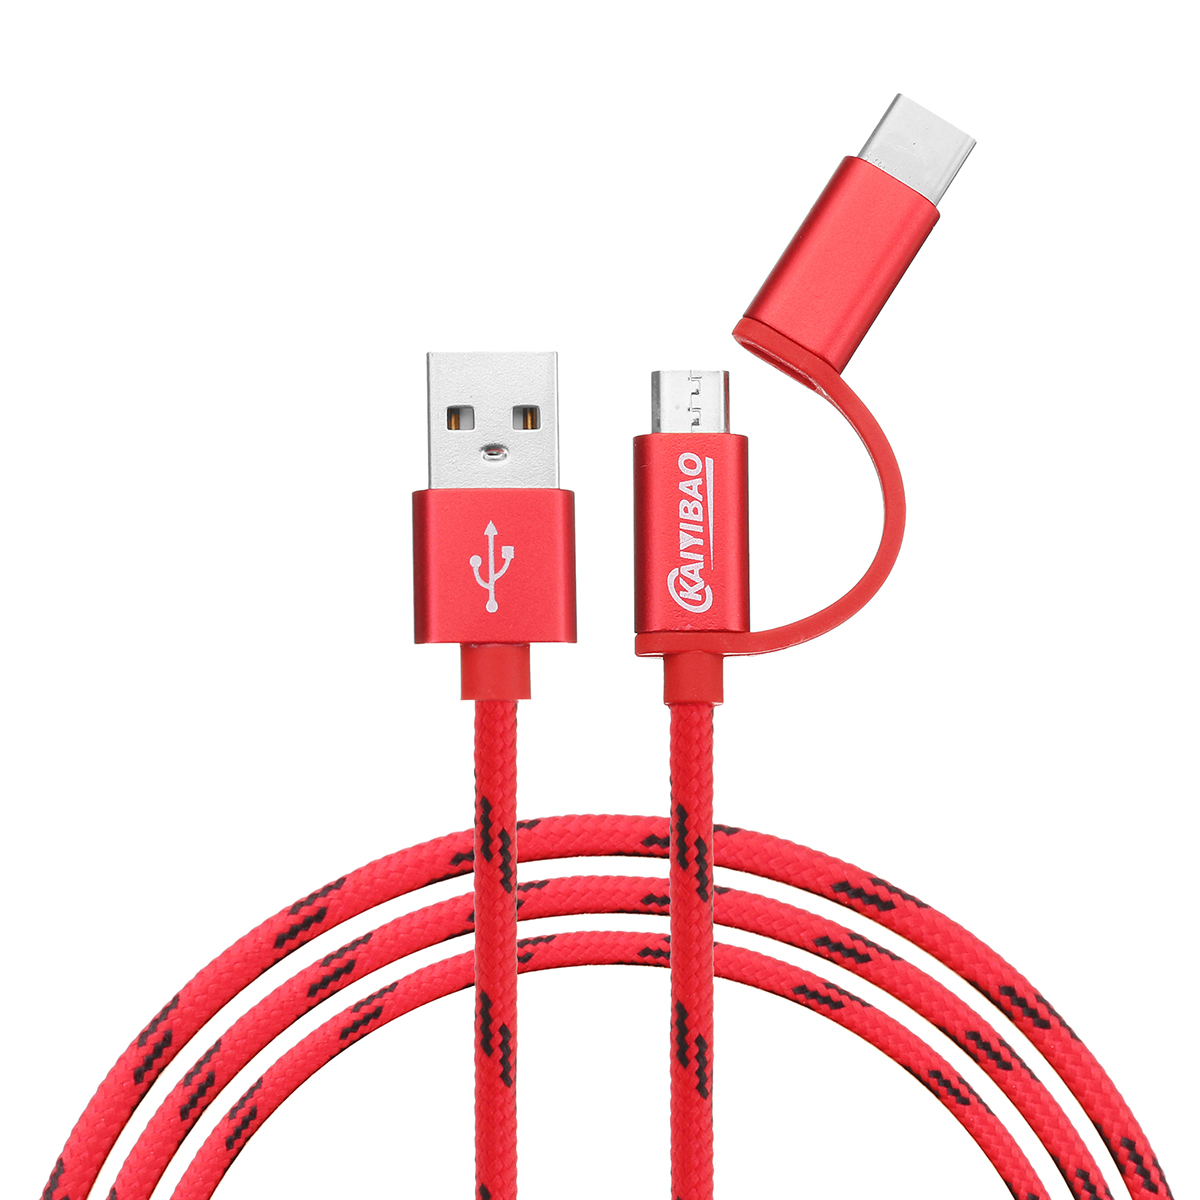 

Bakeey 2.1A 2in1 Micro Type C USB Fast Charging Data Cable 1m For Samsung S8 S7 S6 Xiaomi 6 Redmi